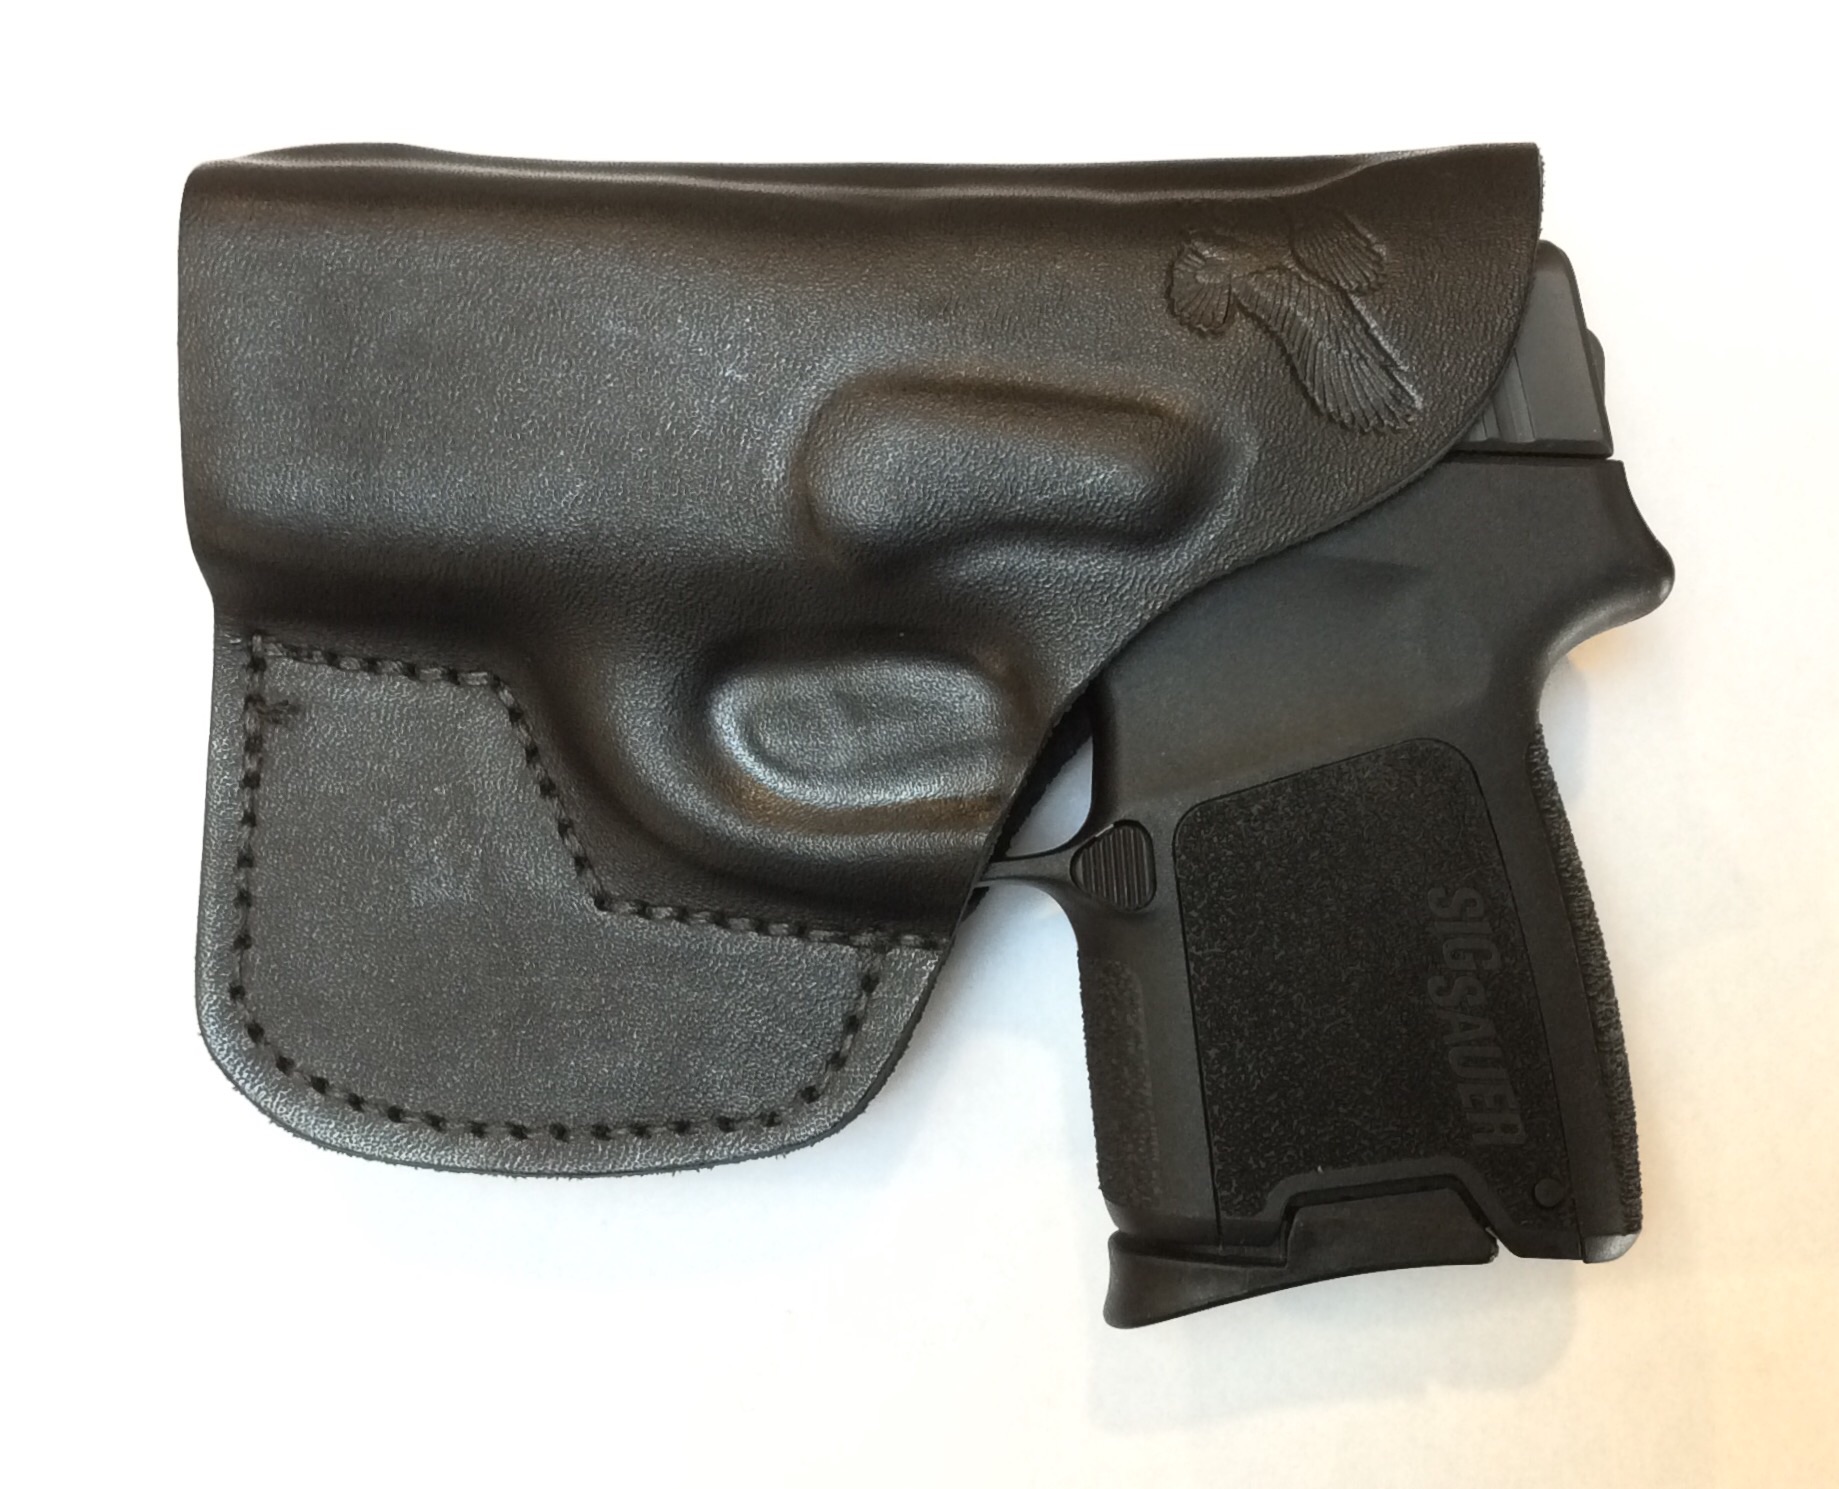 Cebeci Inside and Outside Pants Leather Holster for SIG SAUER P290 